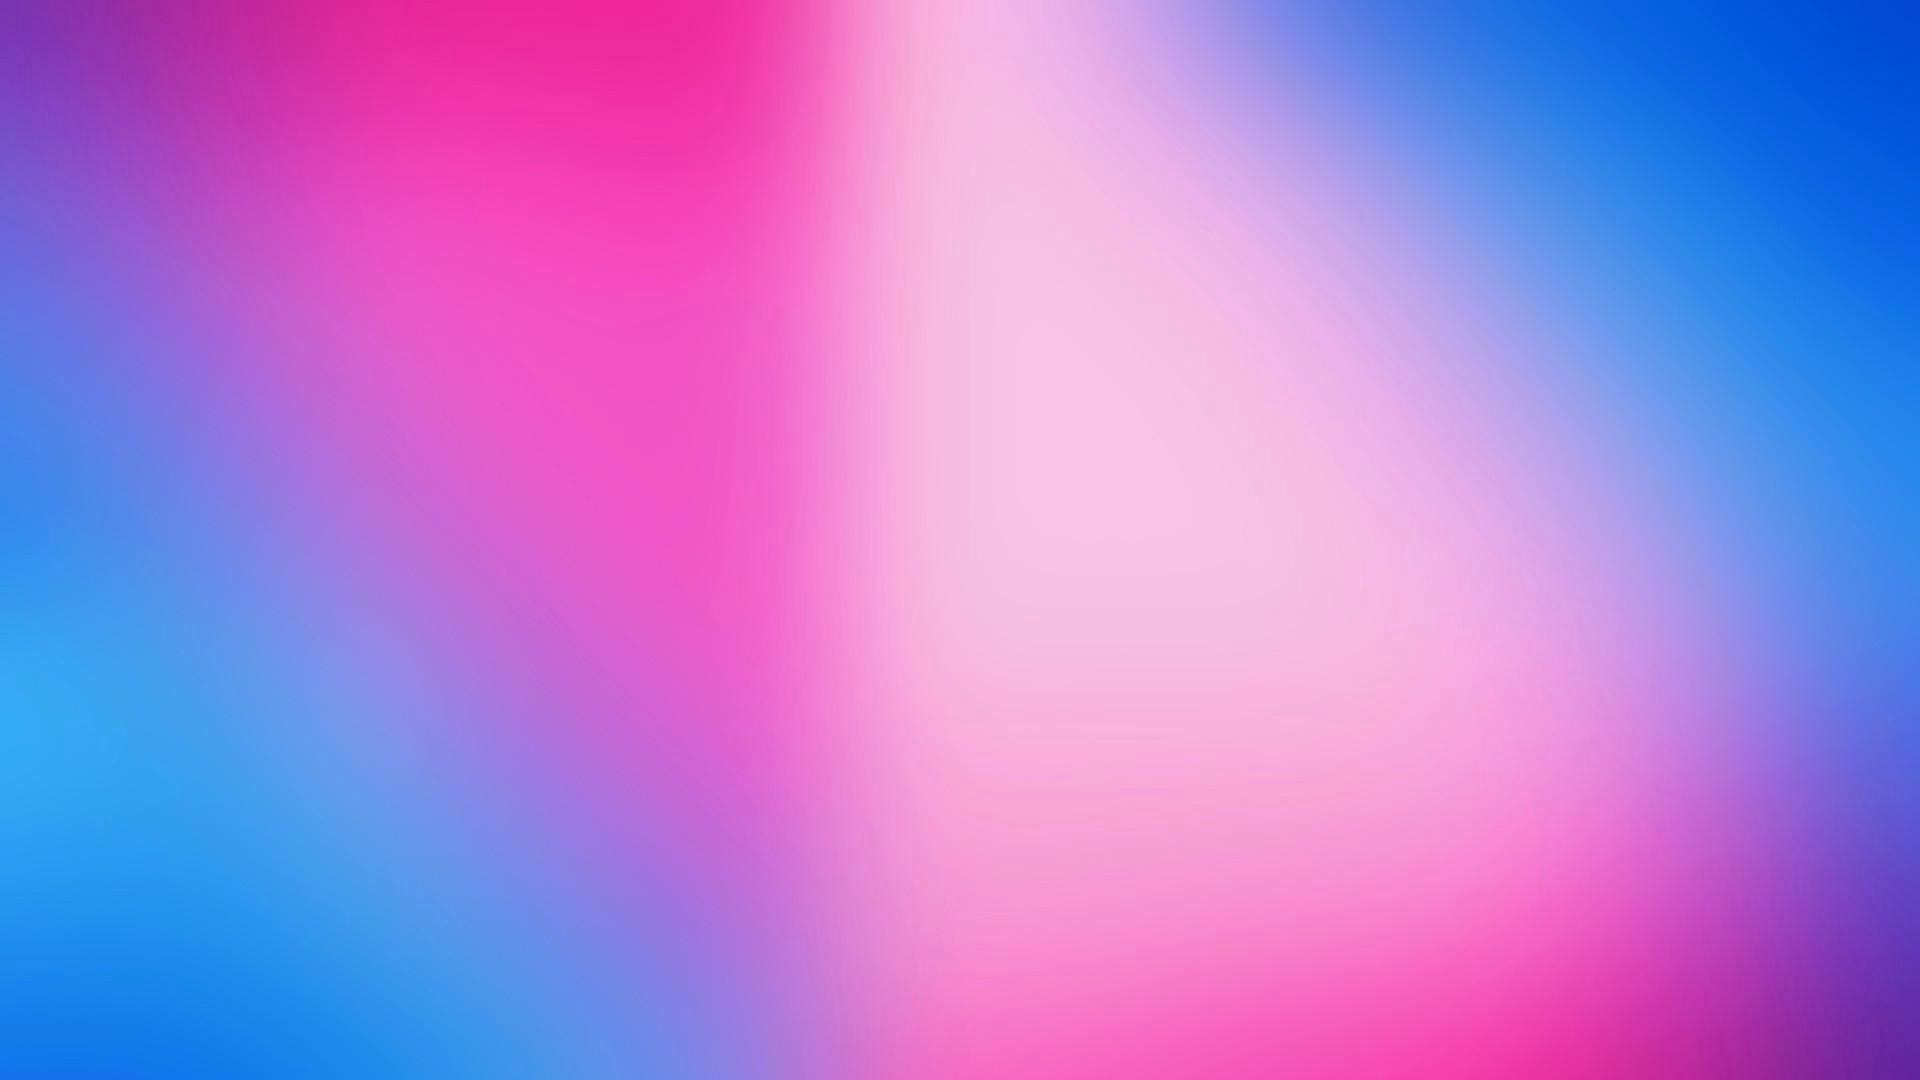 1920x1080, Pink And Blue Ombre Iphone Iphone 1920%c3% - Cool Blue And Pink Backgrounds - HD Wallpaper 